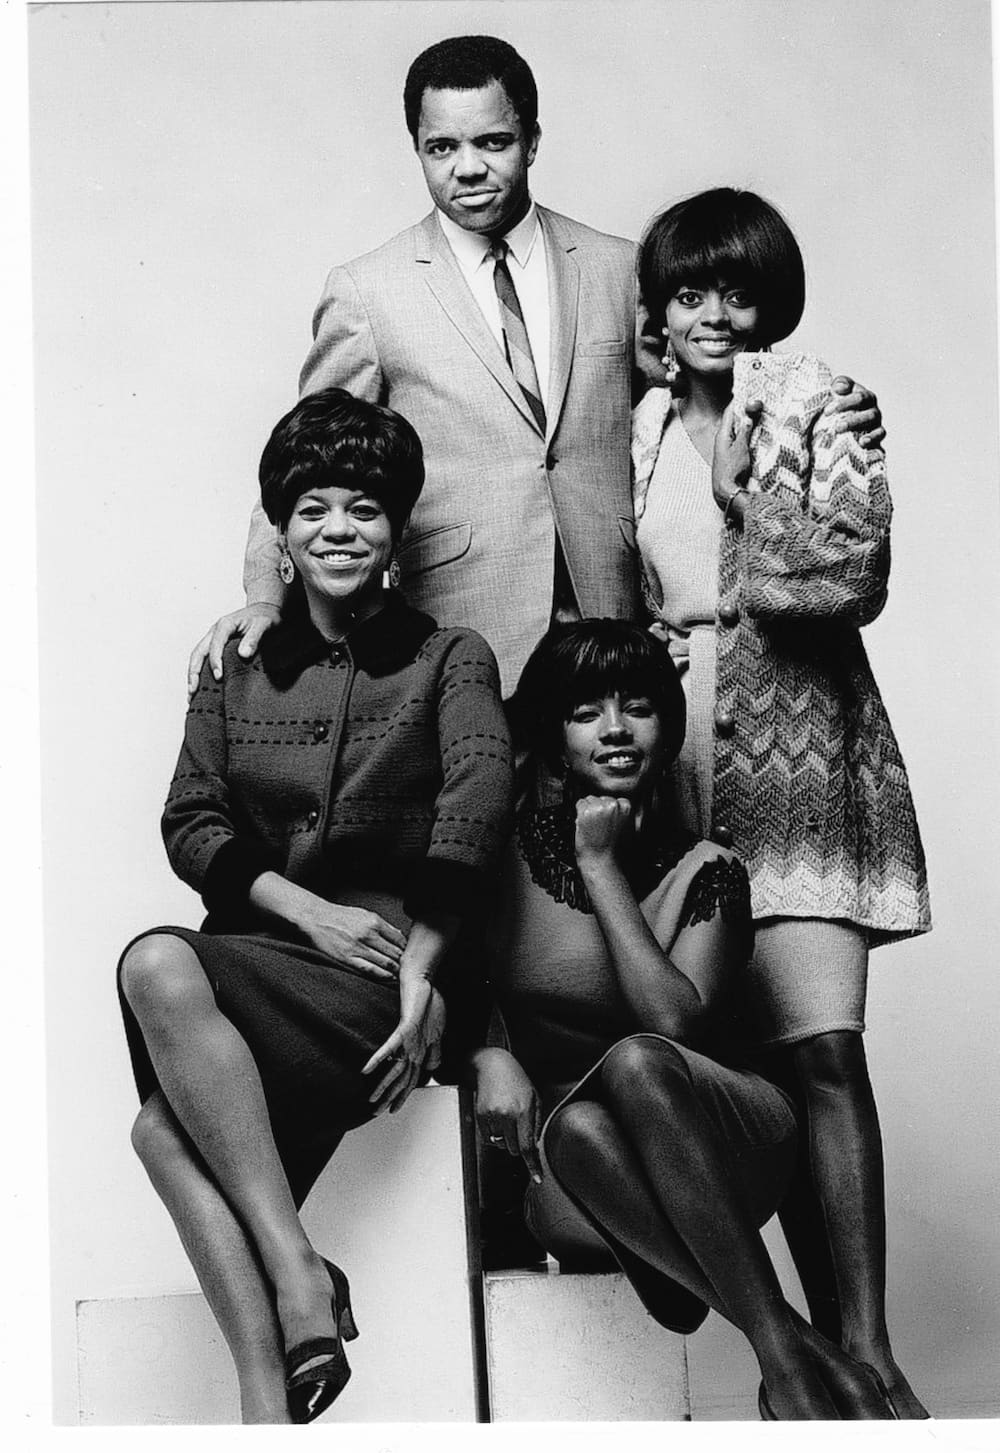 Did berry Gordy have a child with one of the Supremes?